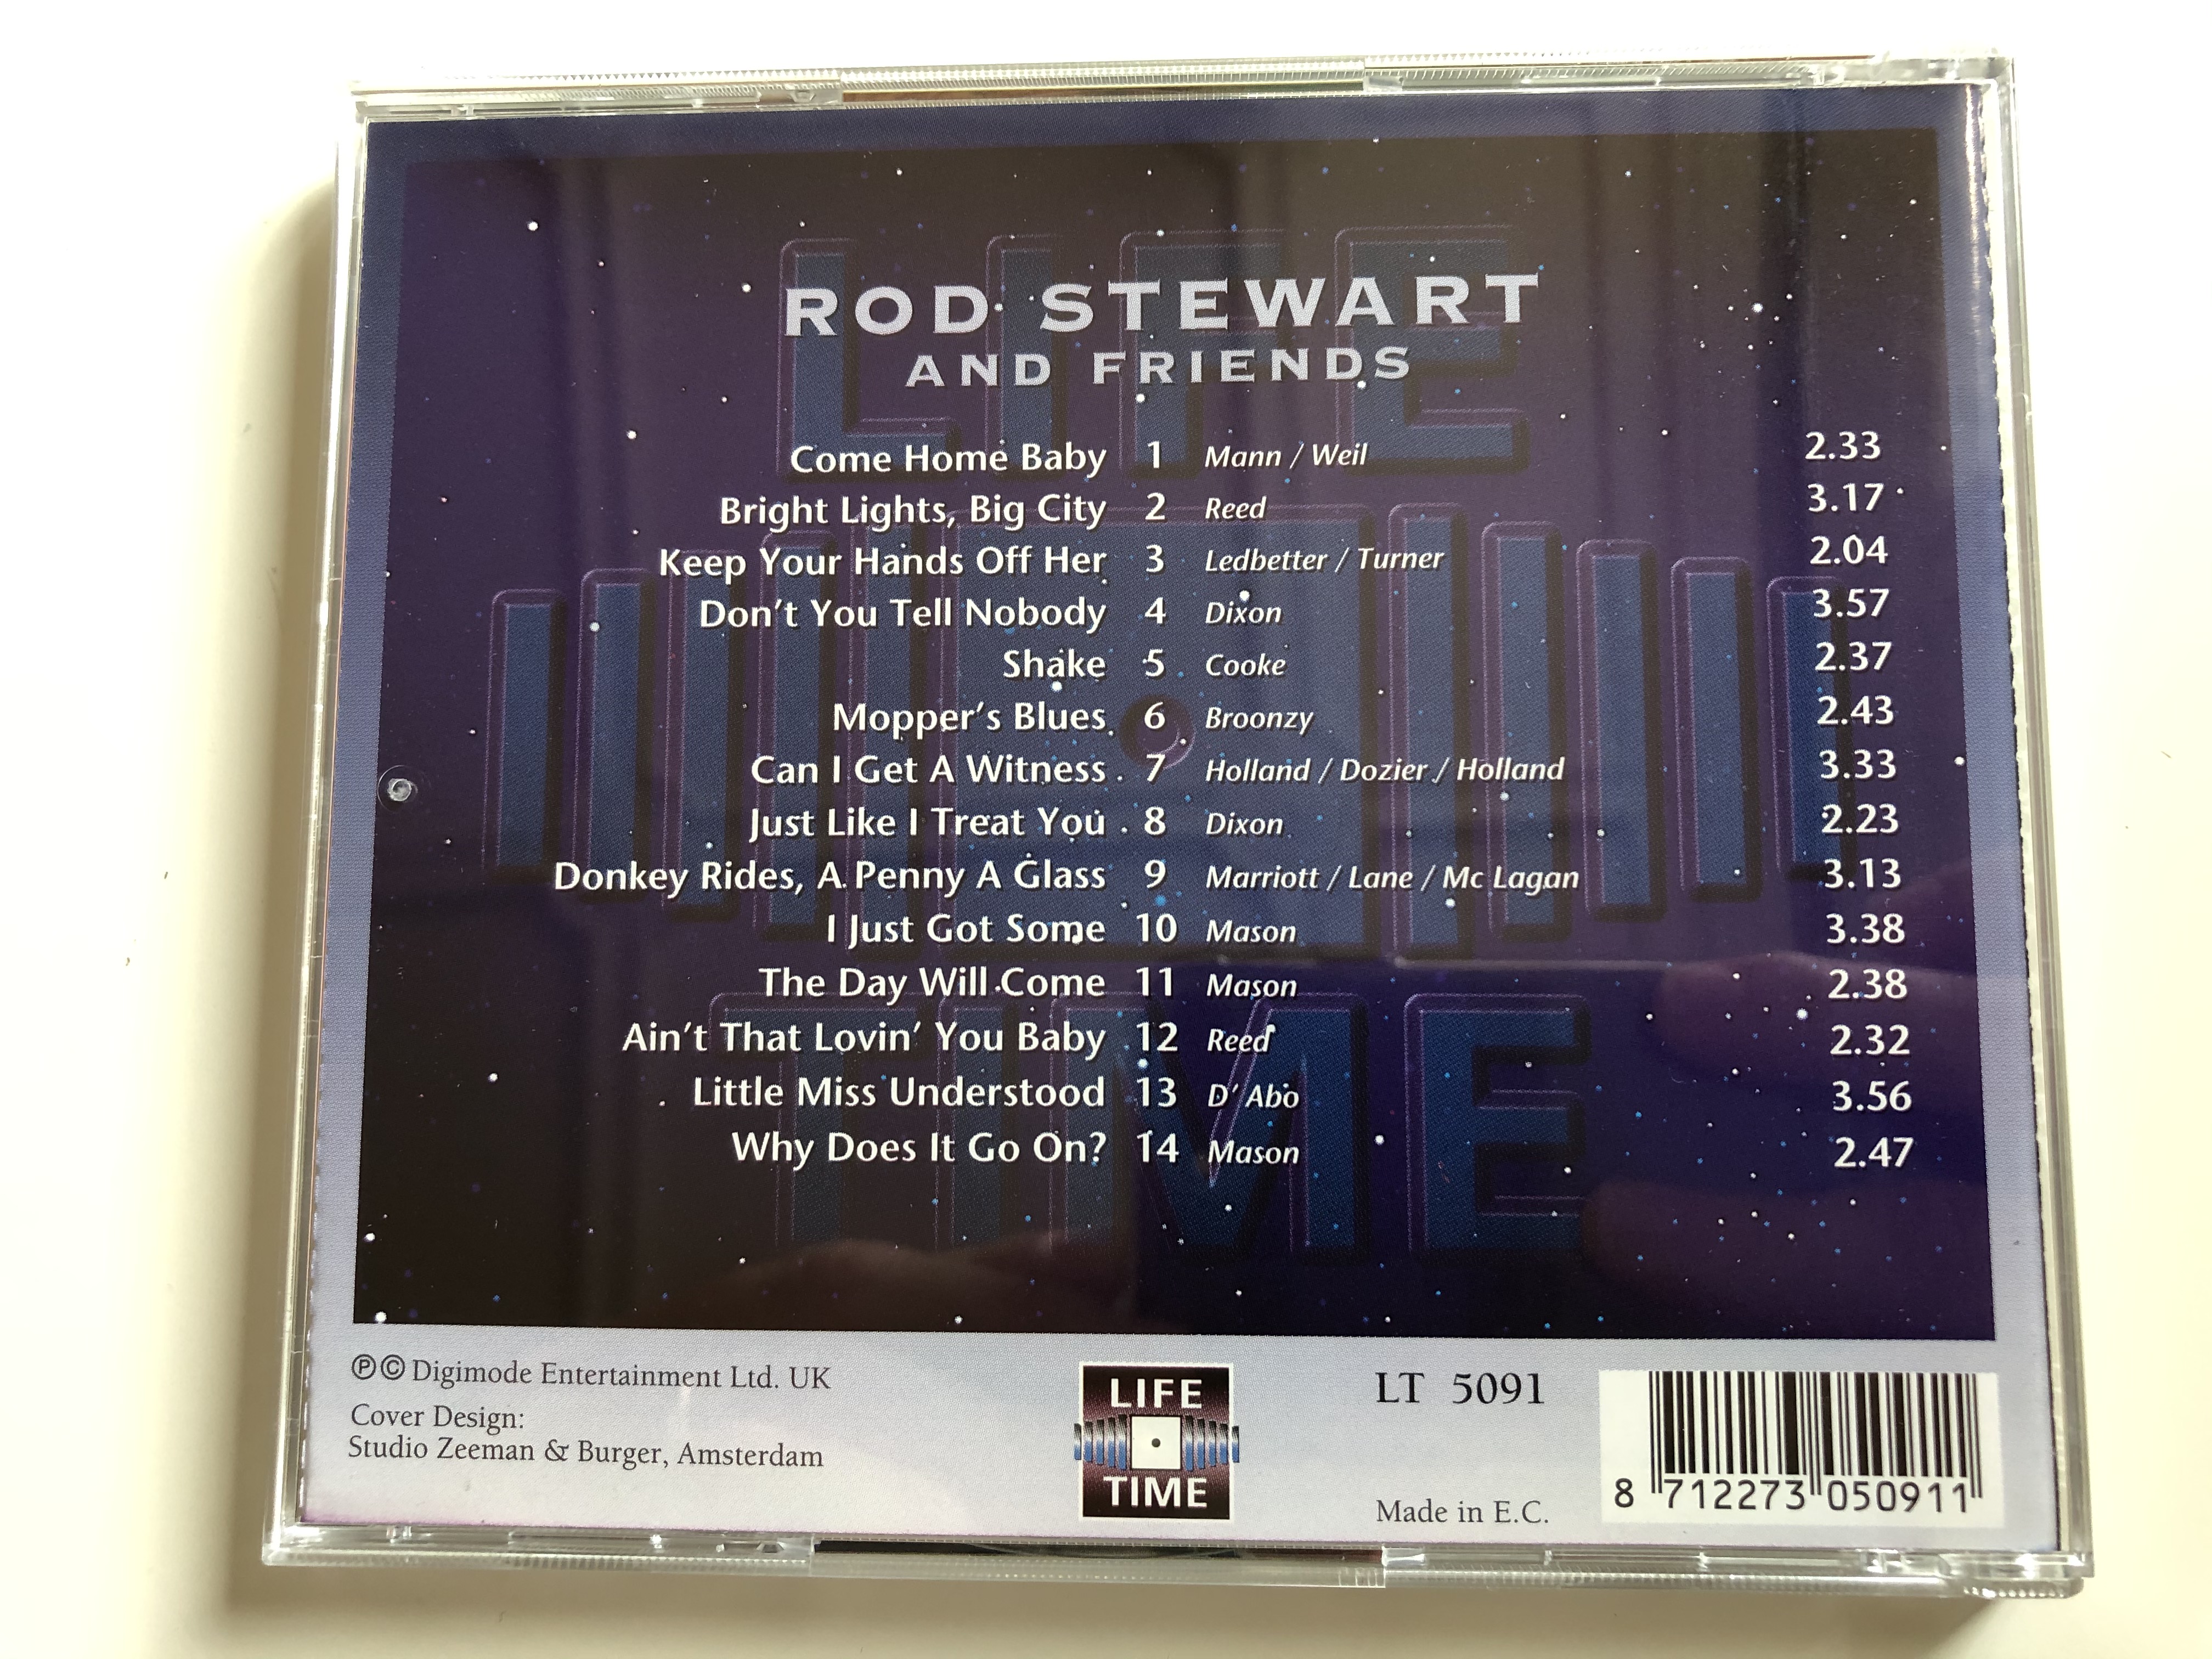 rod-stewart-and-friends-early-years-can-i-get-a-witness-little-miss-understood-ain-t-that-lovin-you-baby-bright-lights-big-city-life-time-audio-cd-lt-5091-3-.jpg